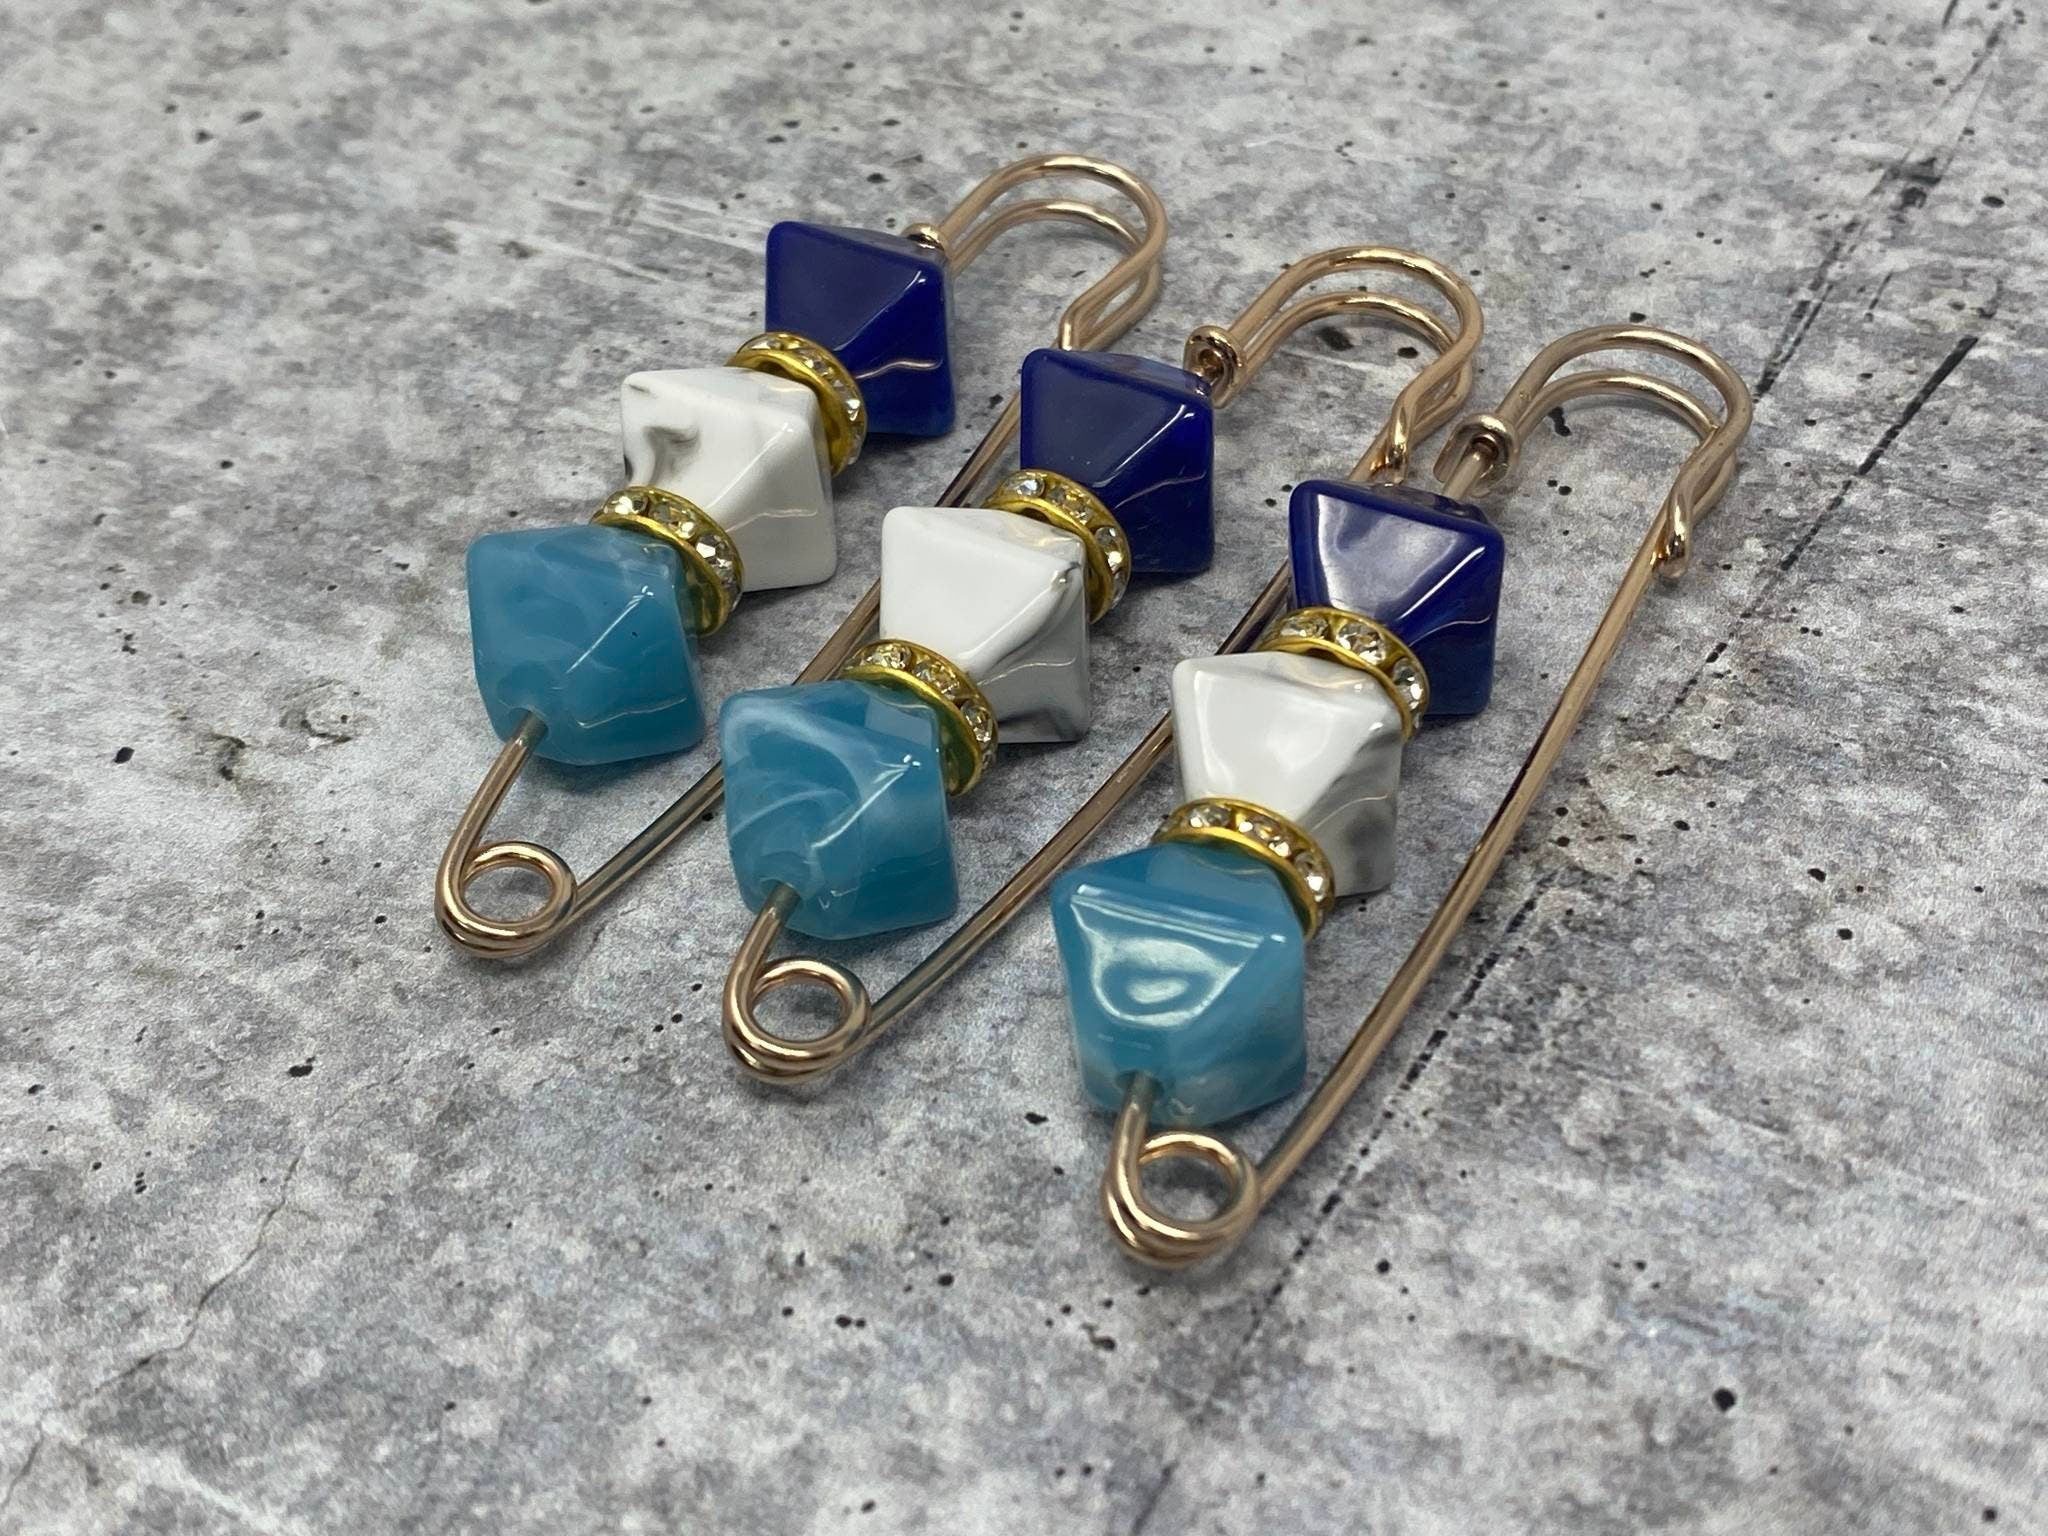 6-pc set, Shades of BLUE Resin Beads w/Gold Bling, Safety Pin Brooches for Clothing Safety Pins for Crafting, DIY Tools, Size 3", Alloy Pins